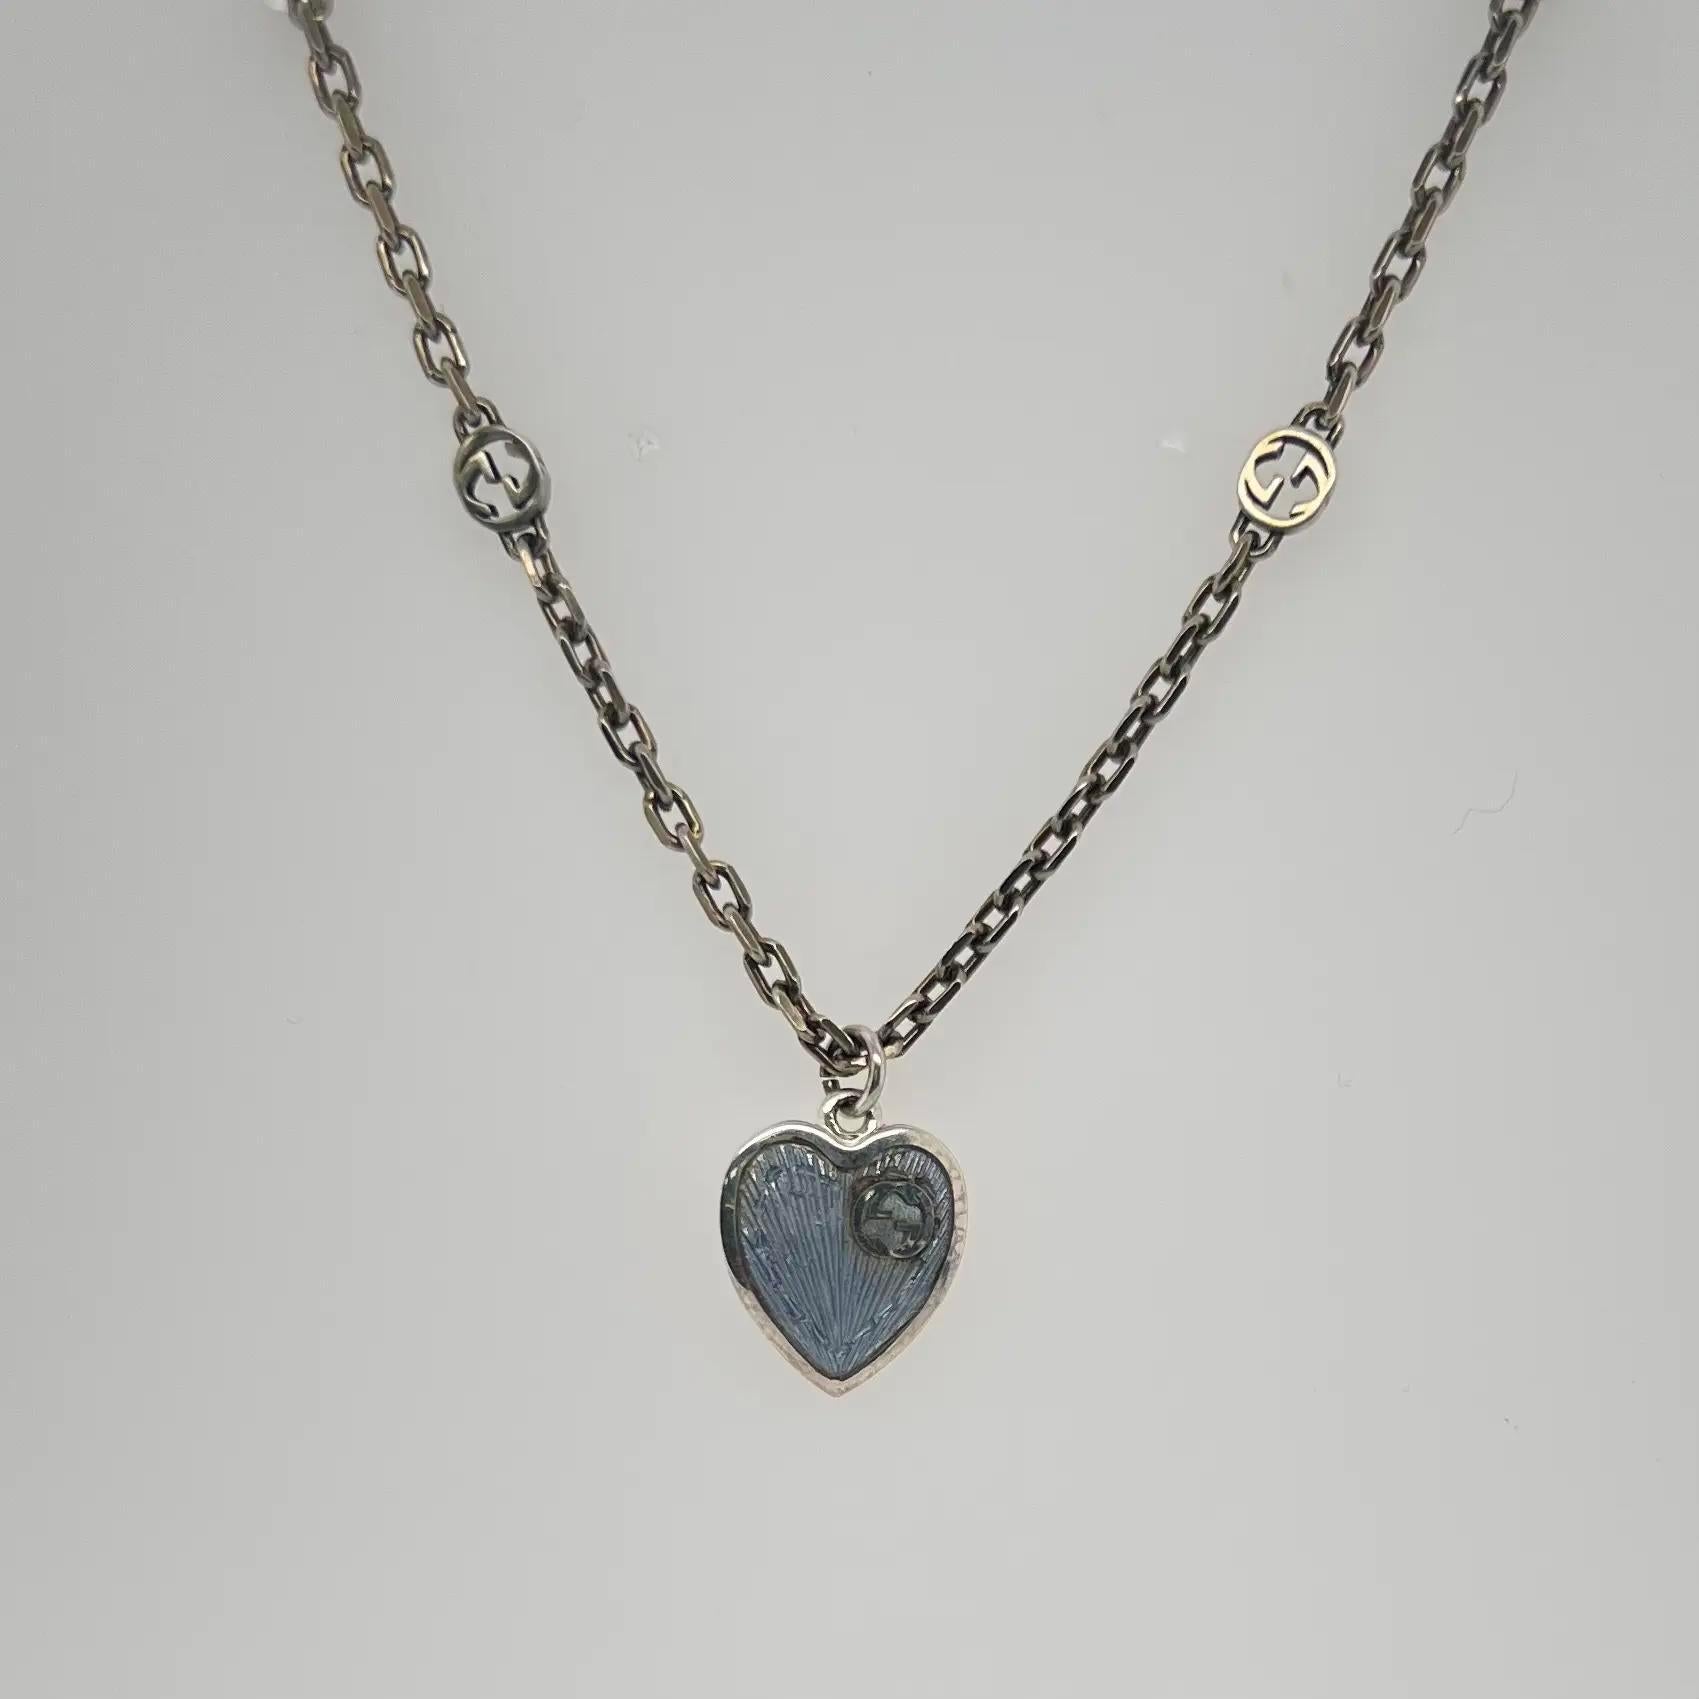 This Beautiful GUCCI necklace is imbued throughout with the emblematic Interlocking G motif with an engraved heart pendant animated by light blue enamel. Designed in 925 sterling silver with semi shiny finished chain. Secured with a lobster lock.